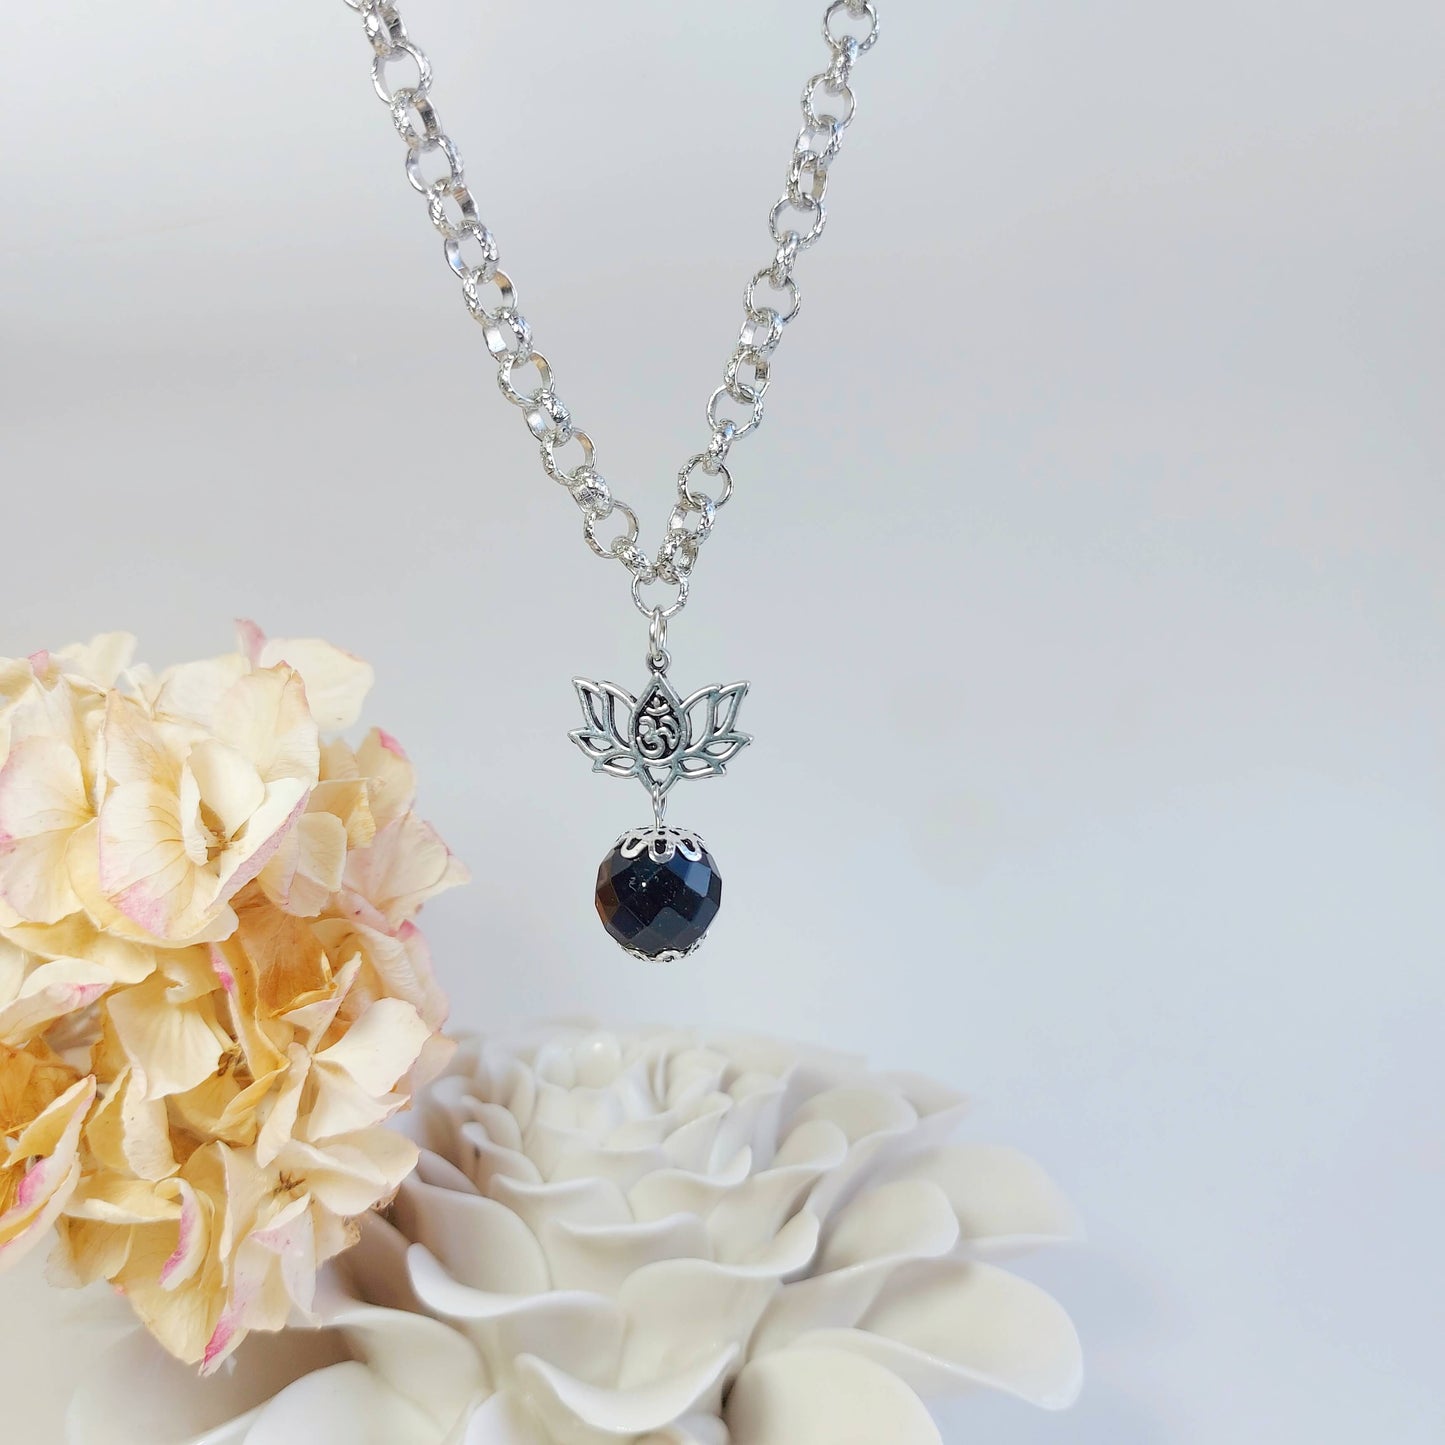 JENNA MAGIC Boho Necklace with Onyx and AUM in Lotus pendant